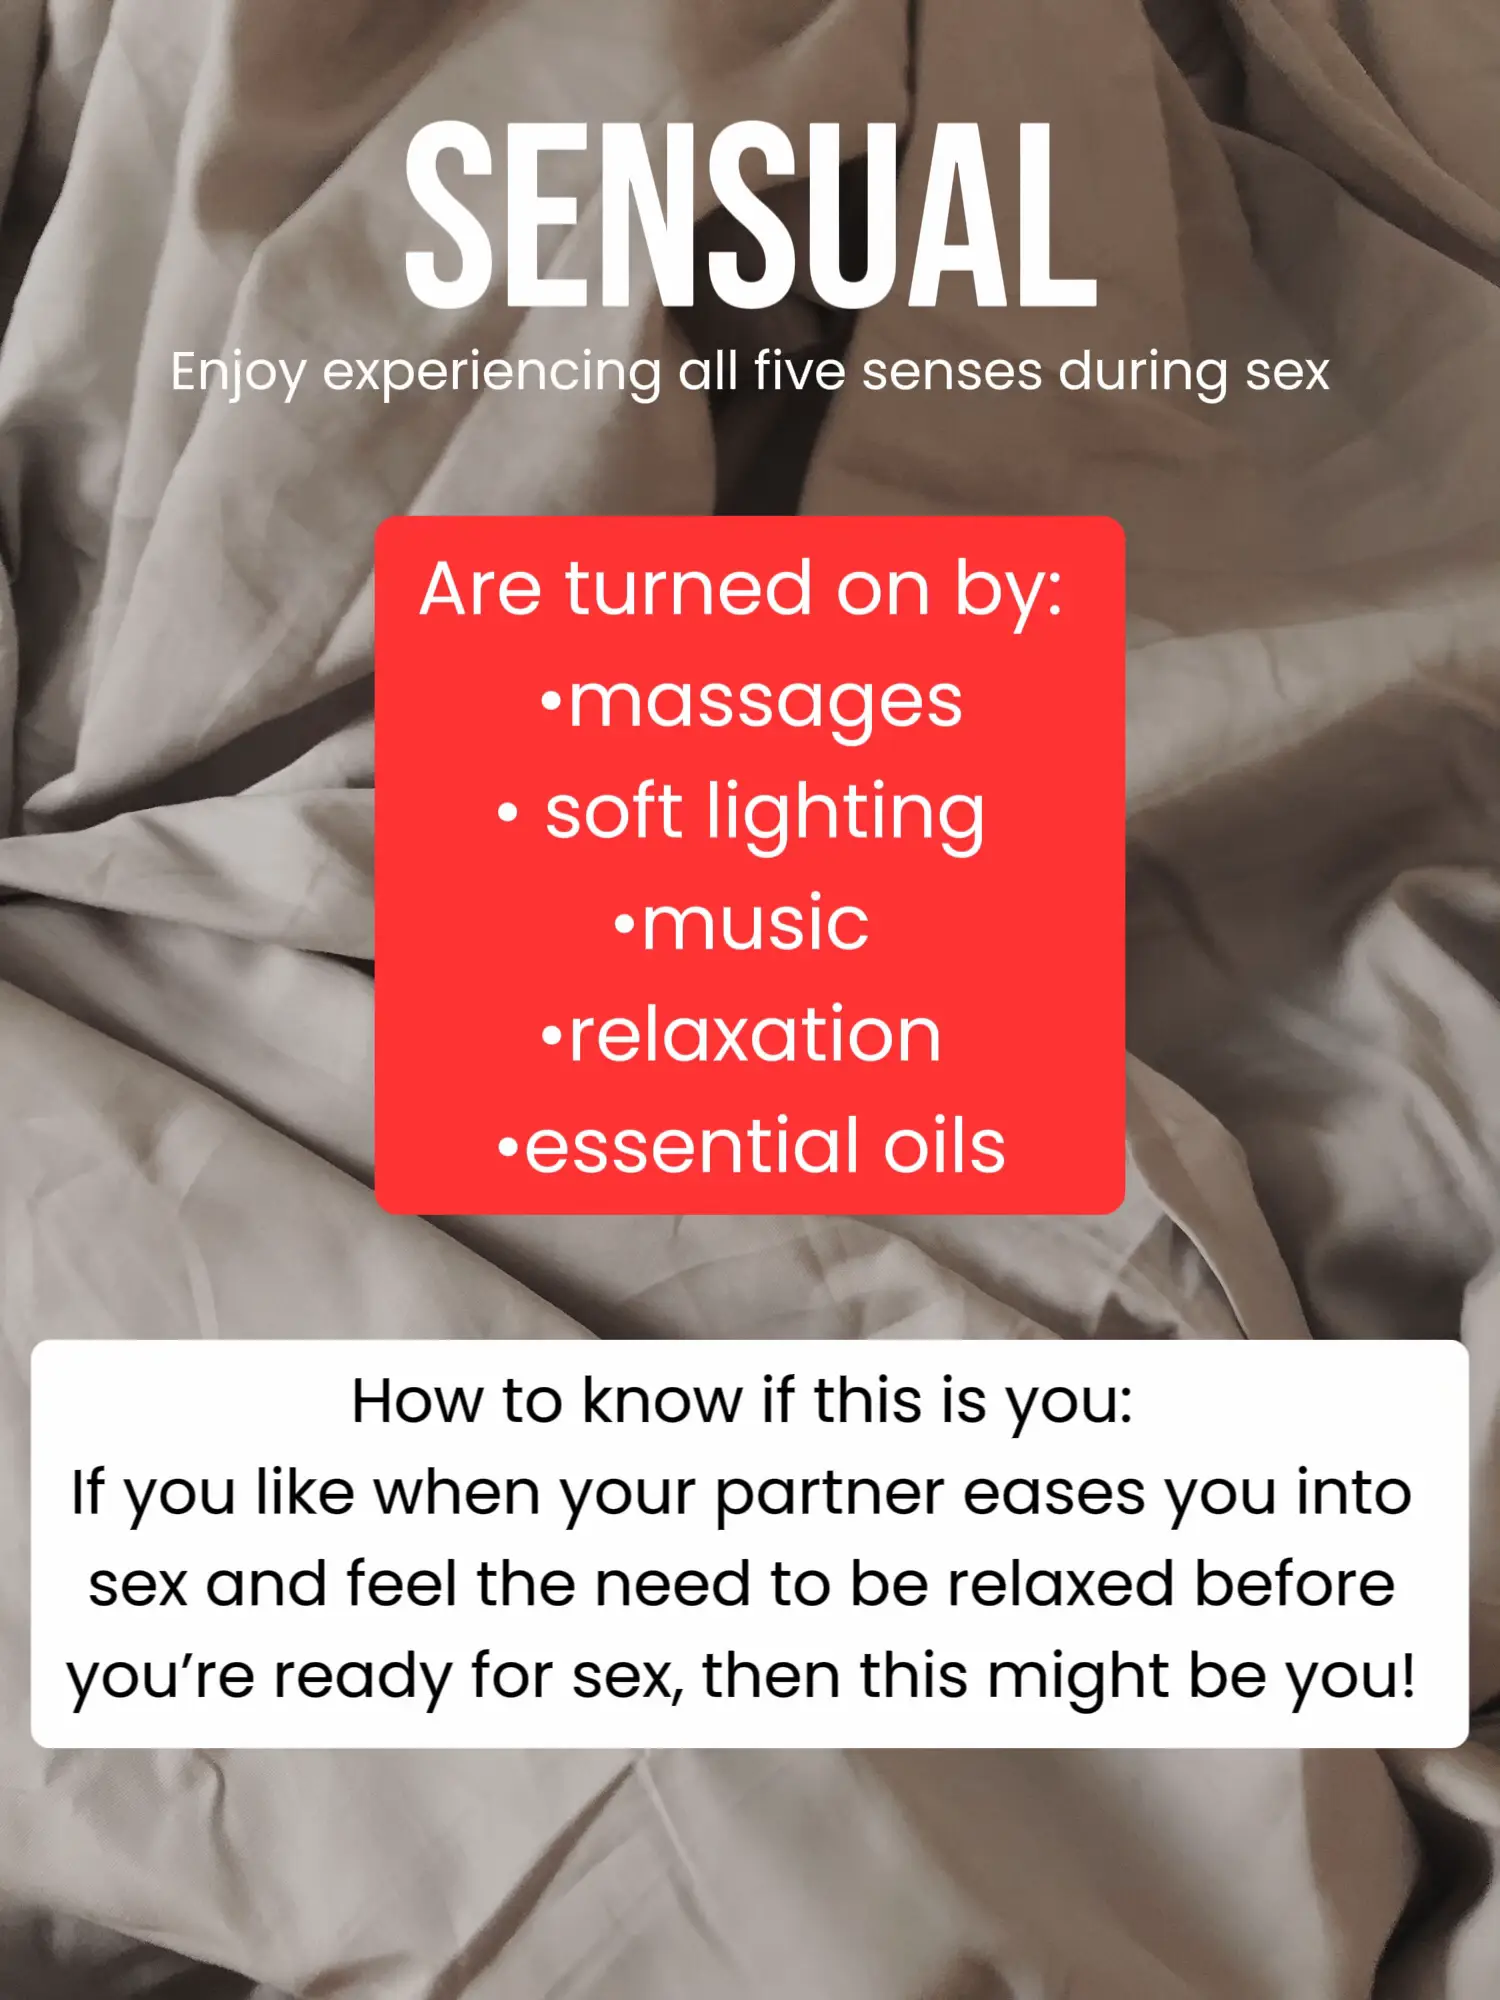  A poster with a sensual experience